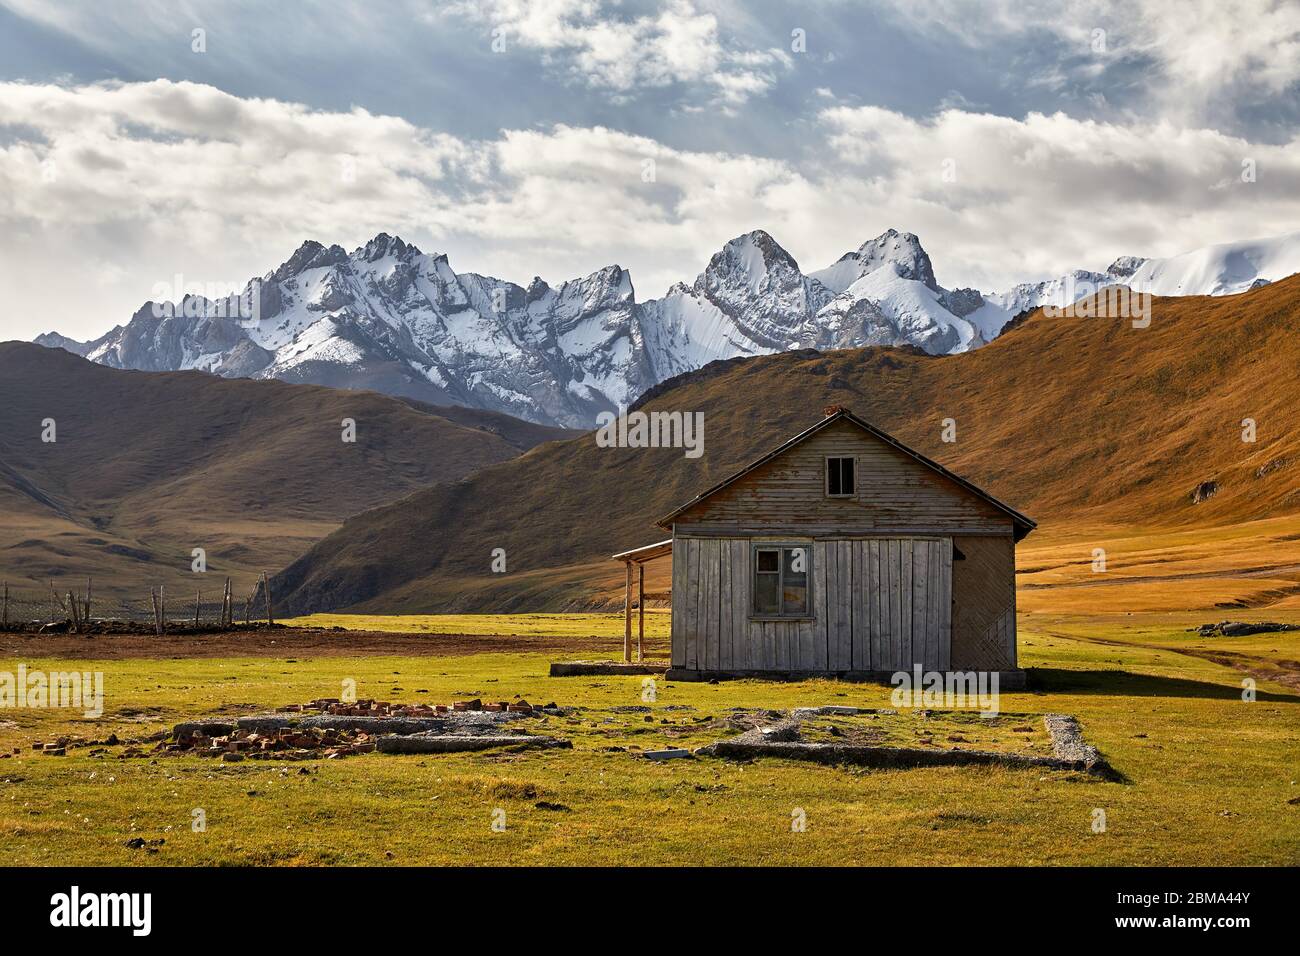 Old rustic wooden house white in the valley with snow mountain peaks near Kel Suu Lake in Naryn region, Kyrgyzstan Stock Photo